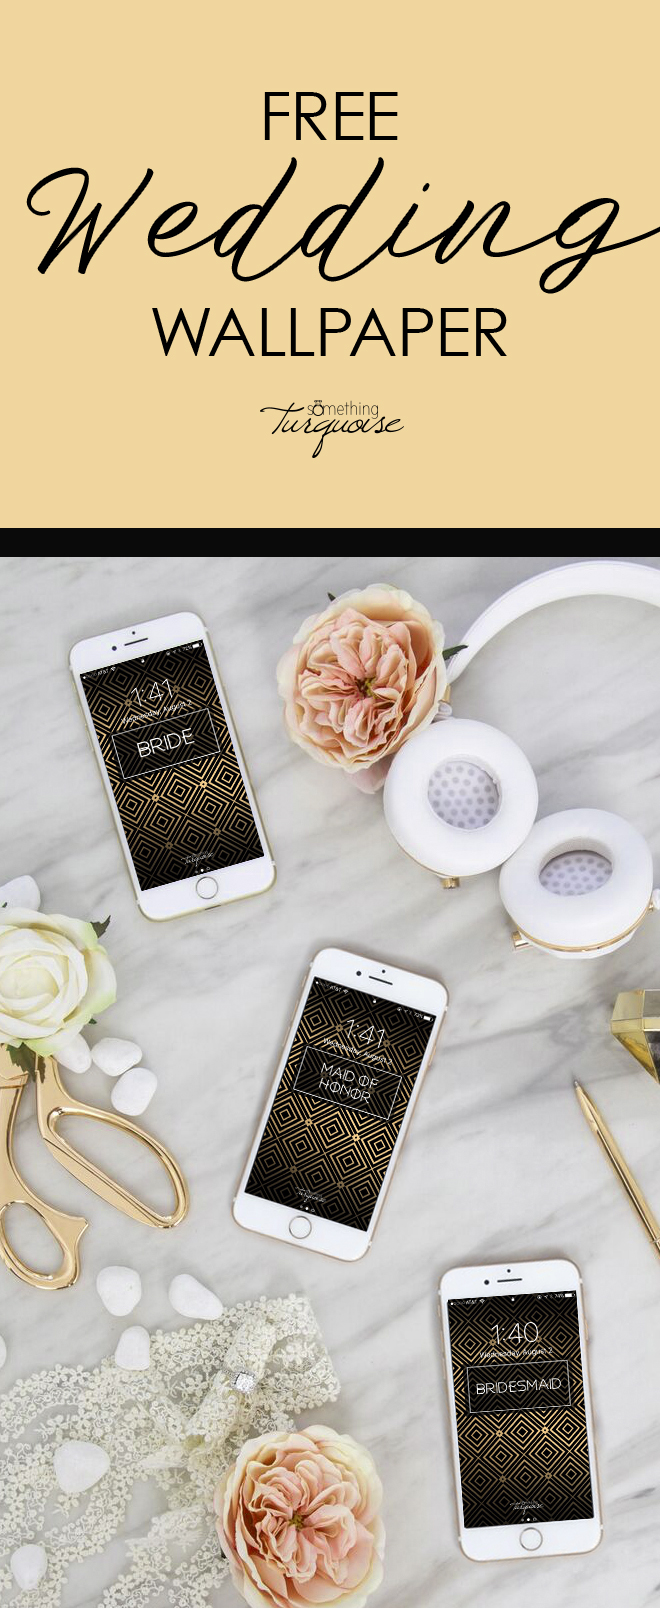 Check out this gorgeous BRIDAL PARTY iPhone wallpaper suite, it's free!